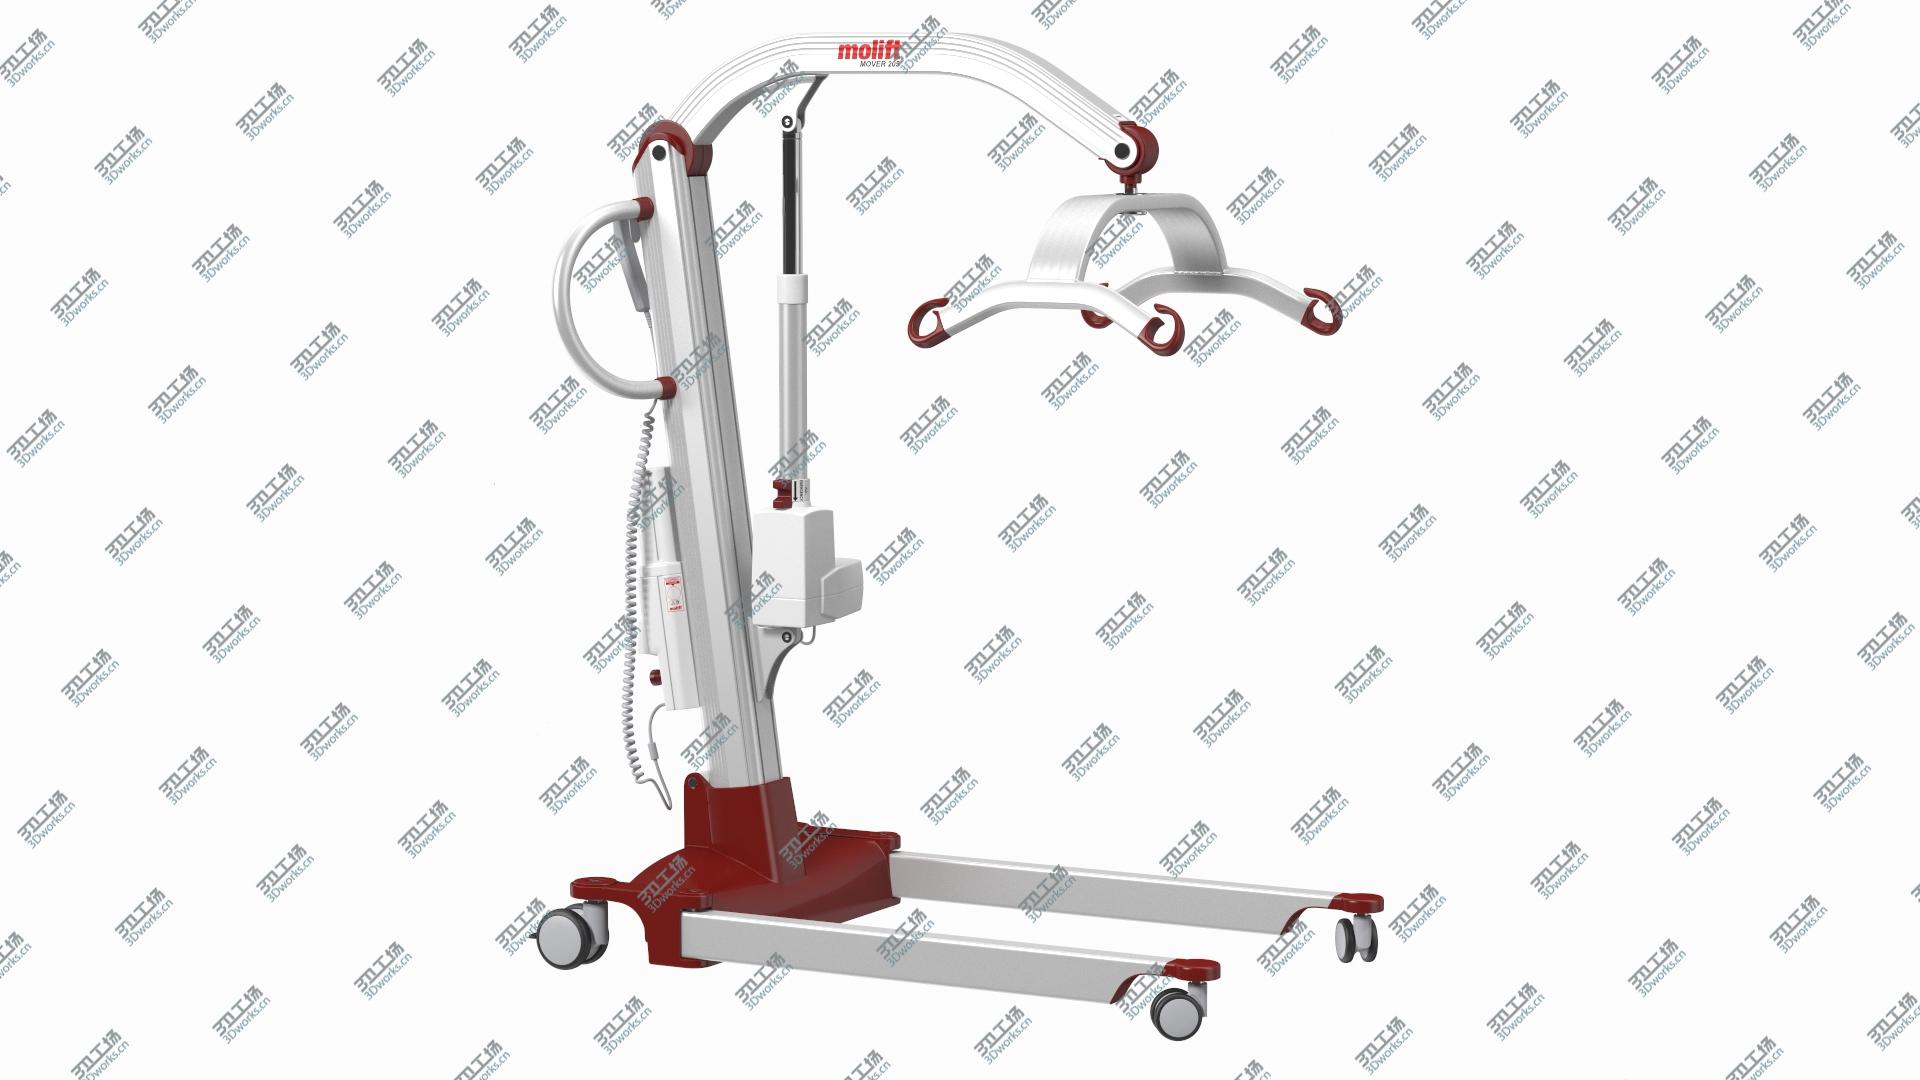 images/goods_img/2021040164/Patient Lift Molift Mover 205 3D model/2.jpg